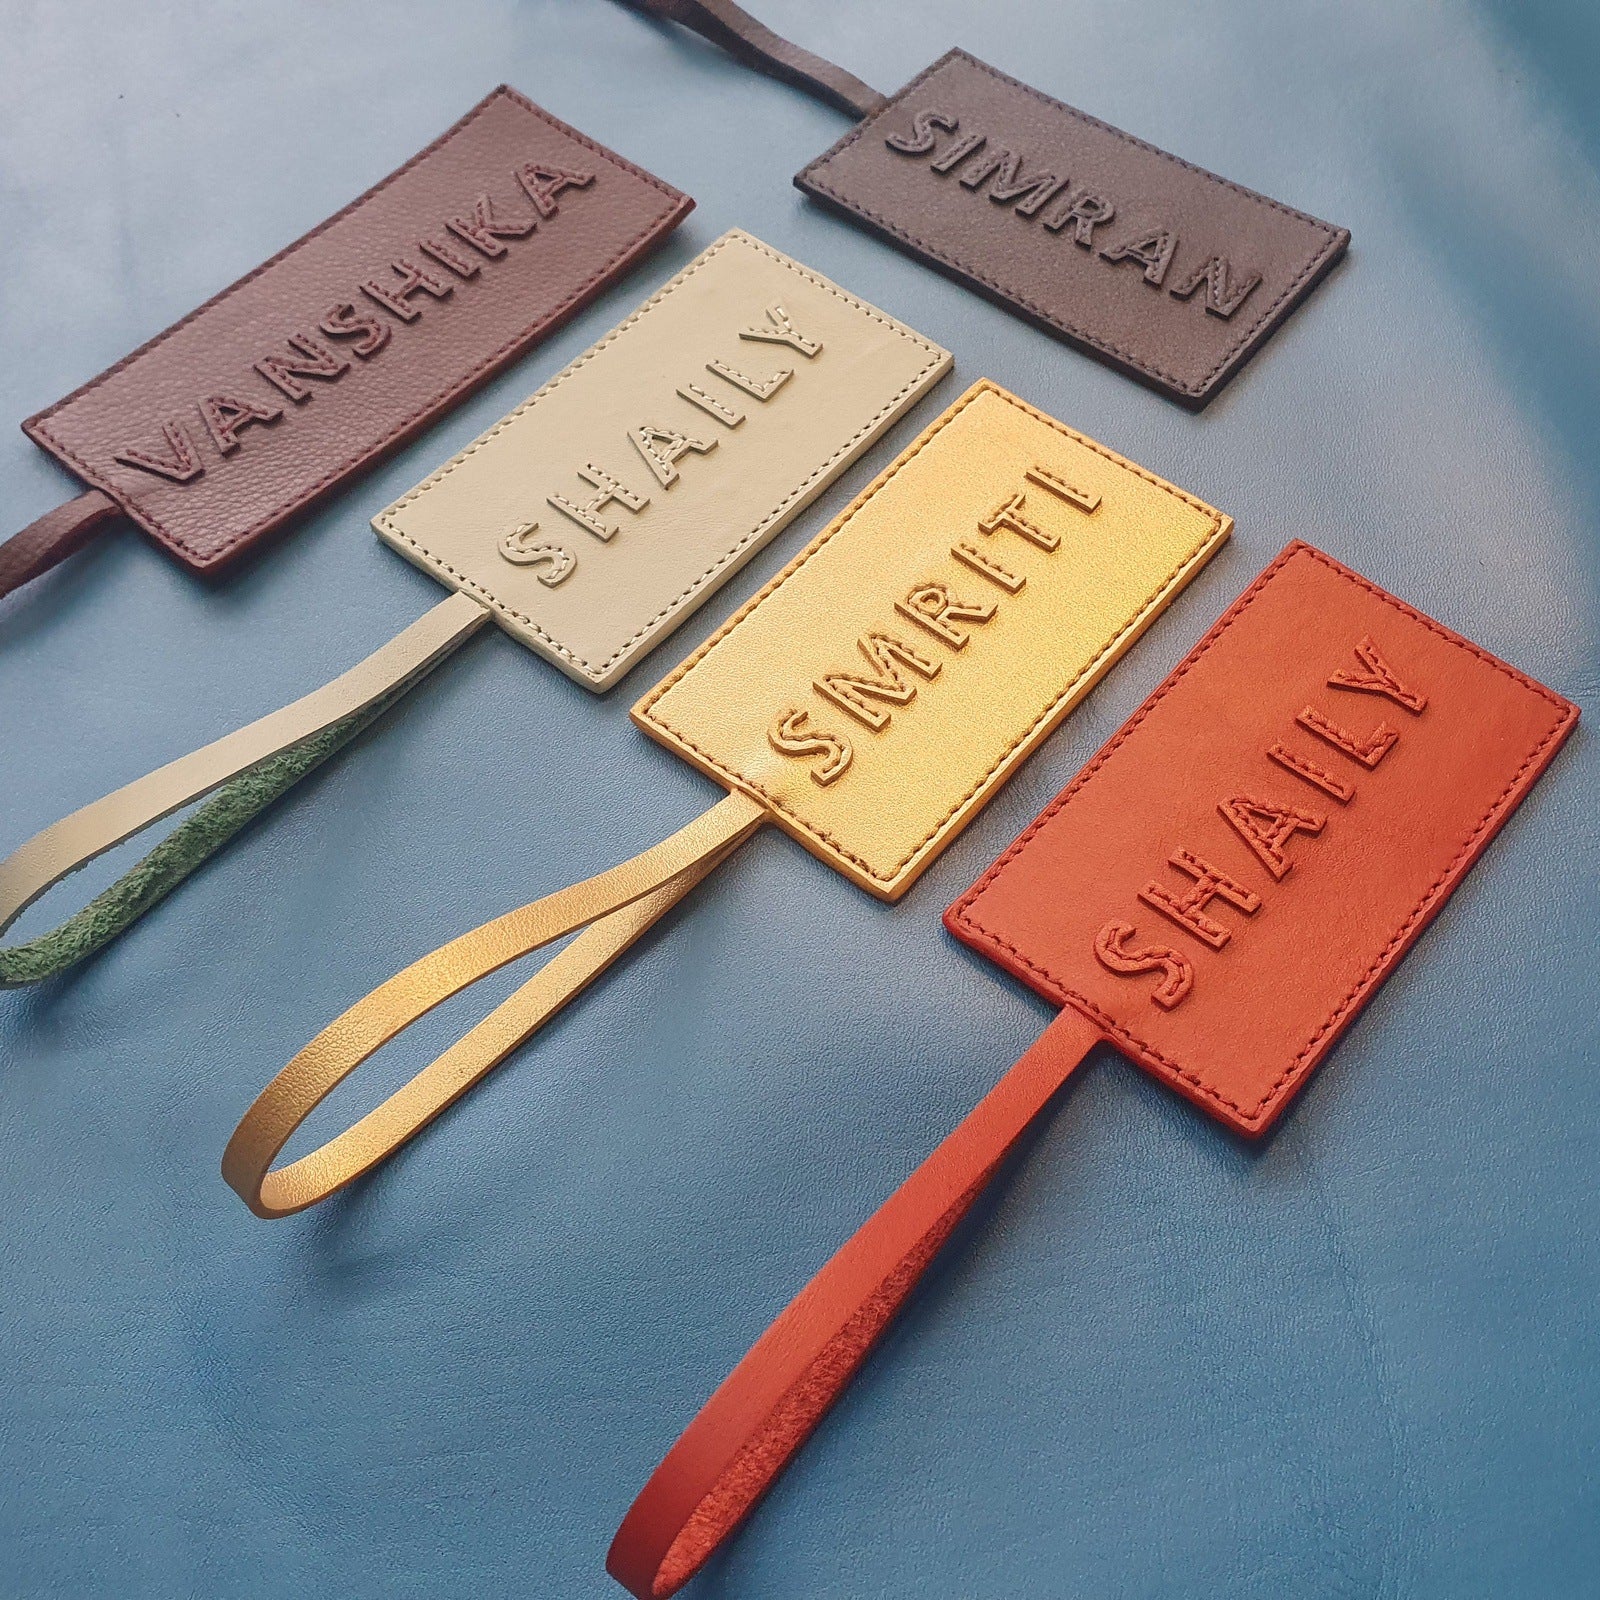 Vegan Leather Name Tags - The Style Salad